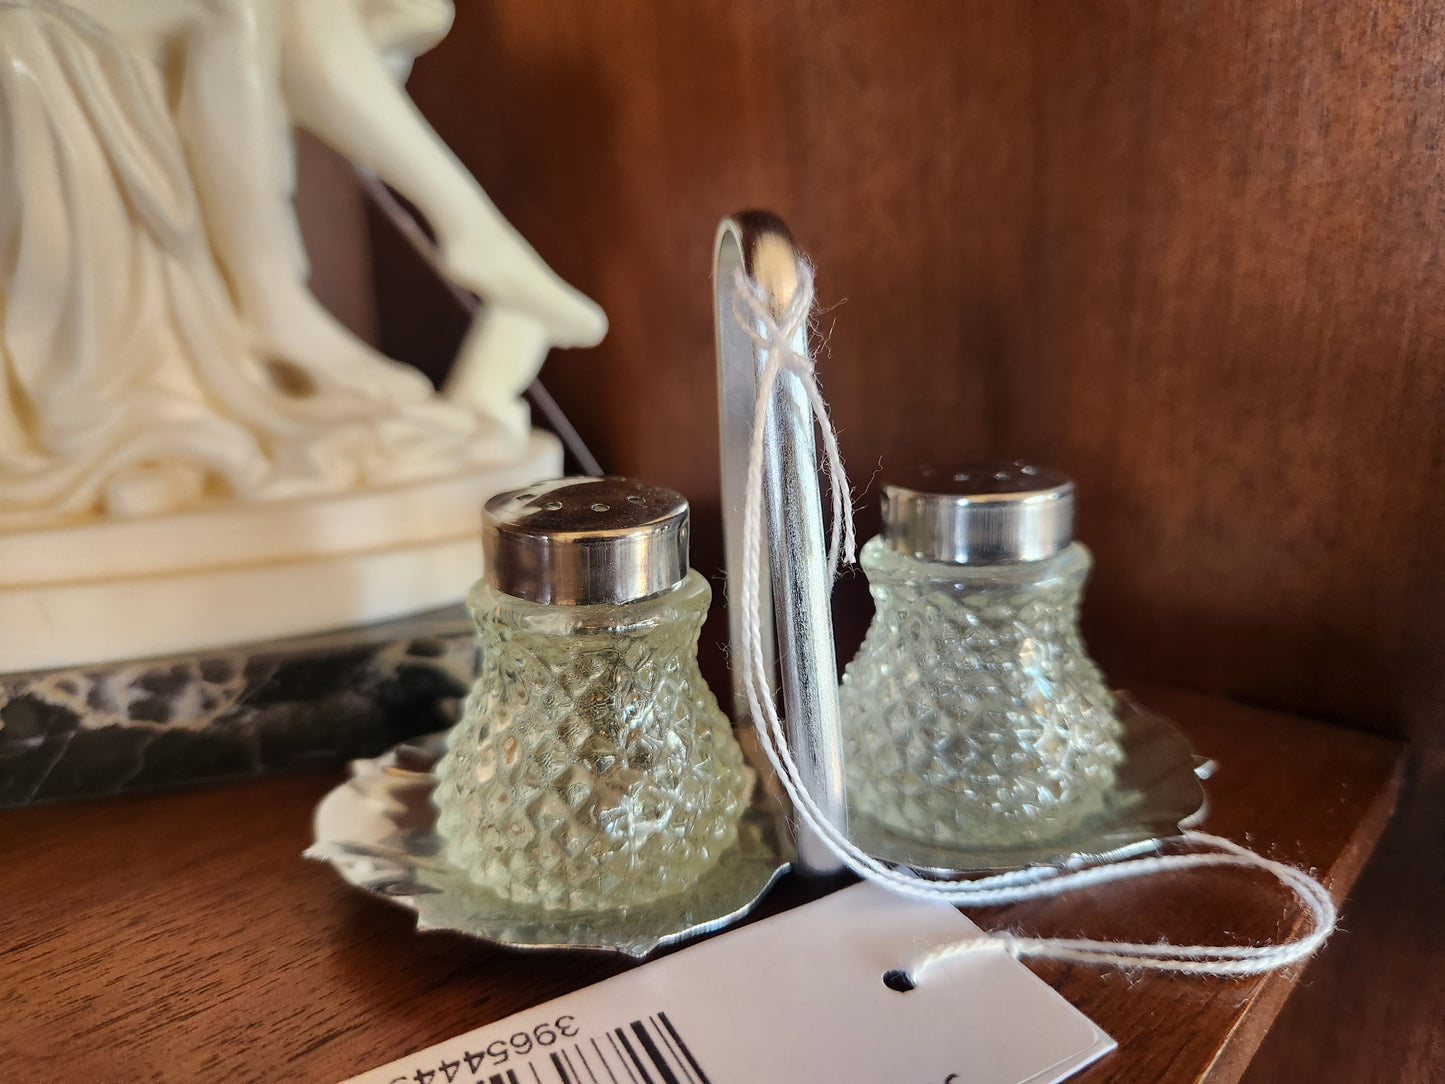 Salt & Pepper Shakers on Tiny Tray